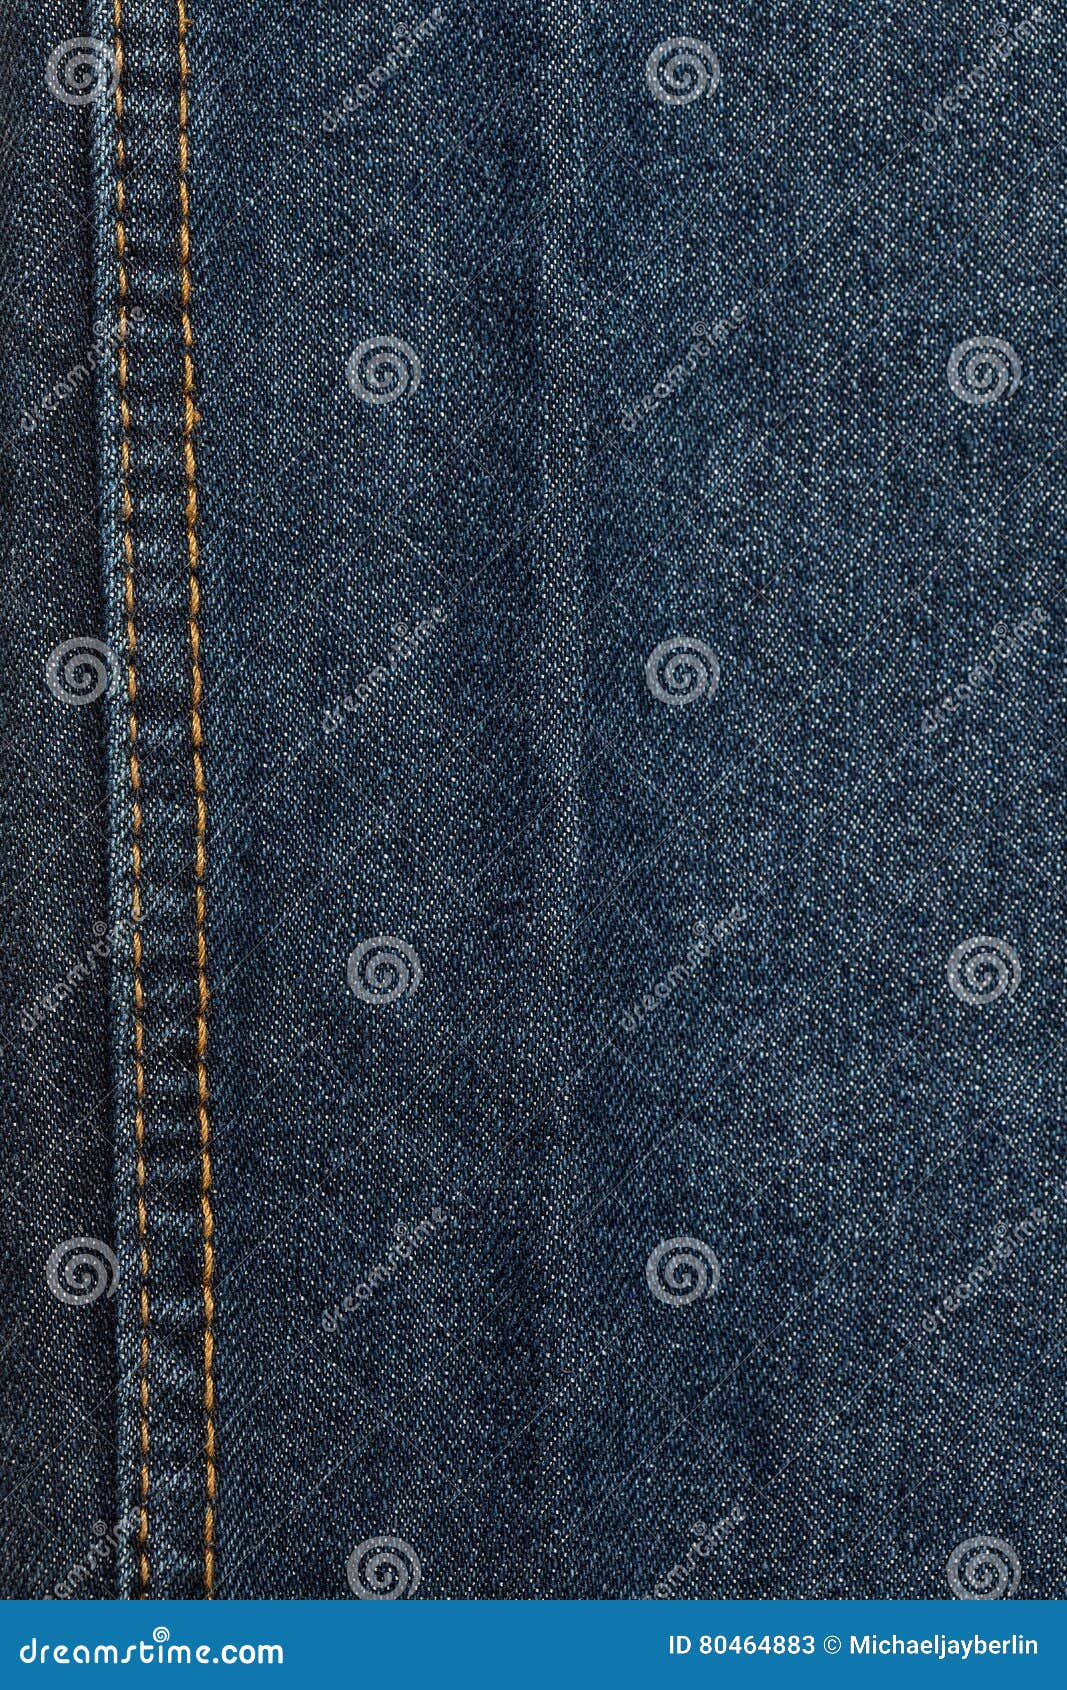 Textile - Fabric Series: Jeans Stitches Stock Image - Image of stitch ...